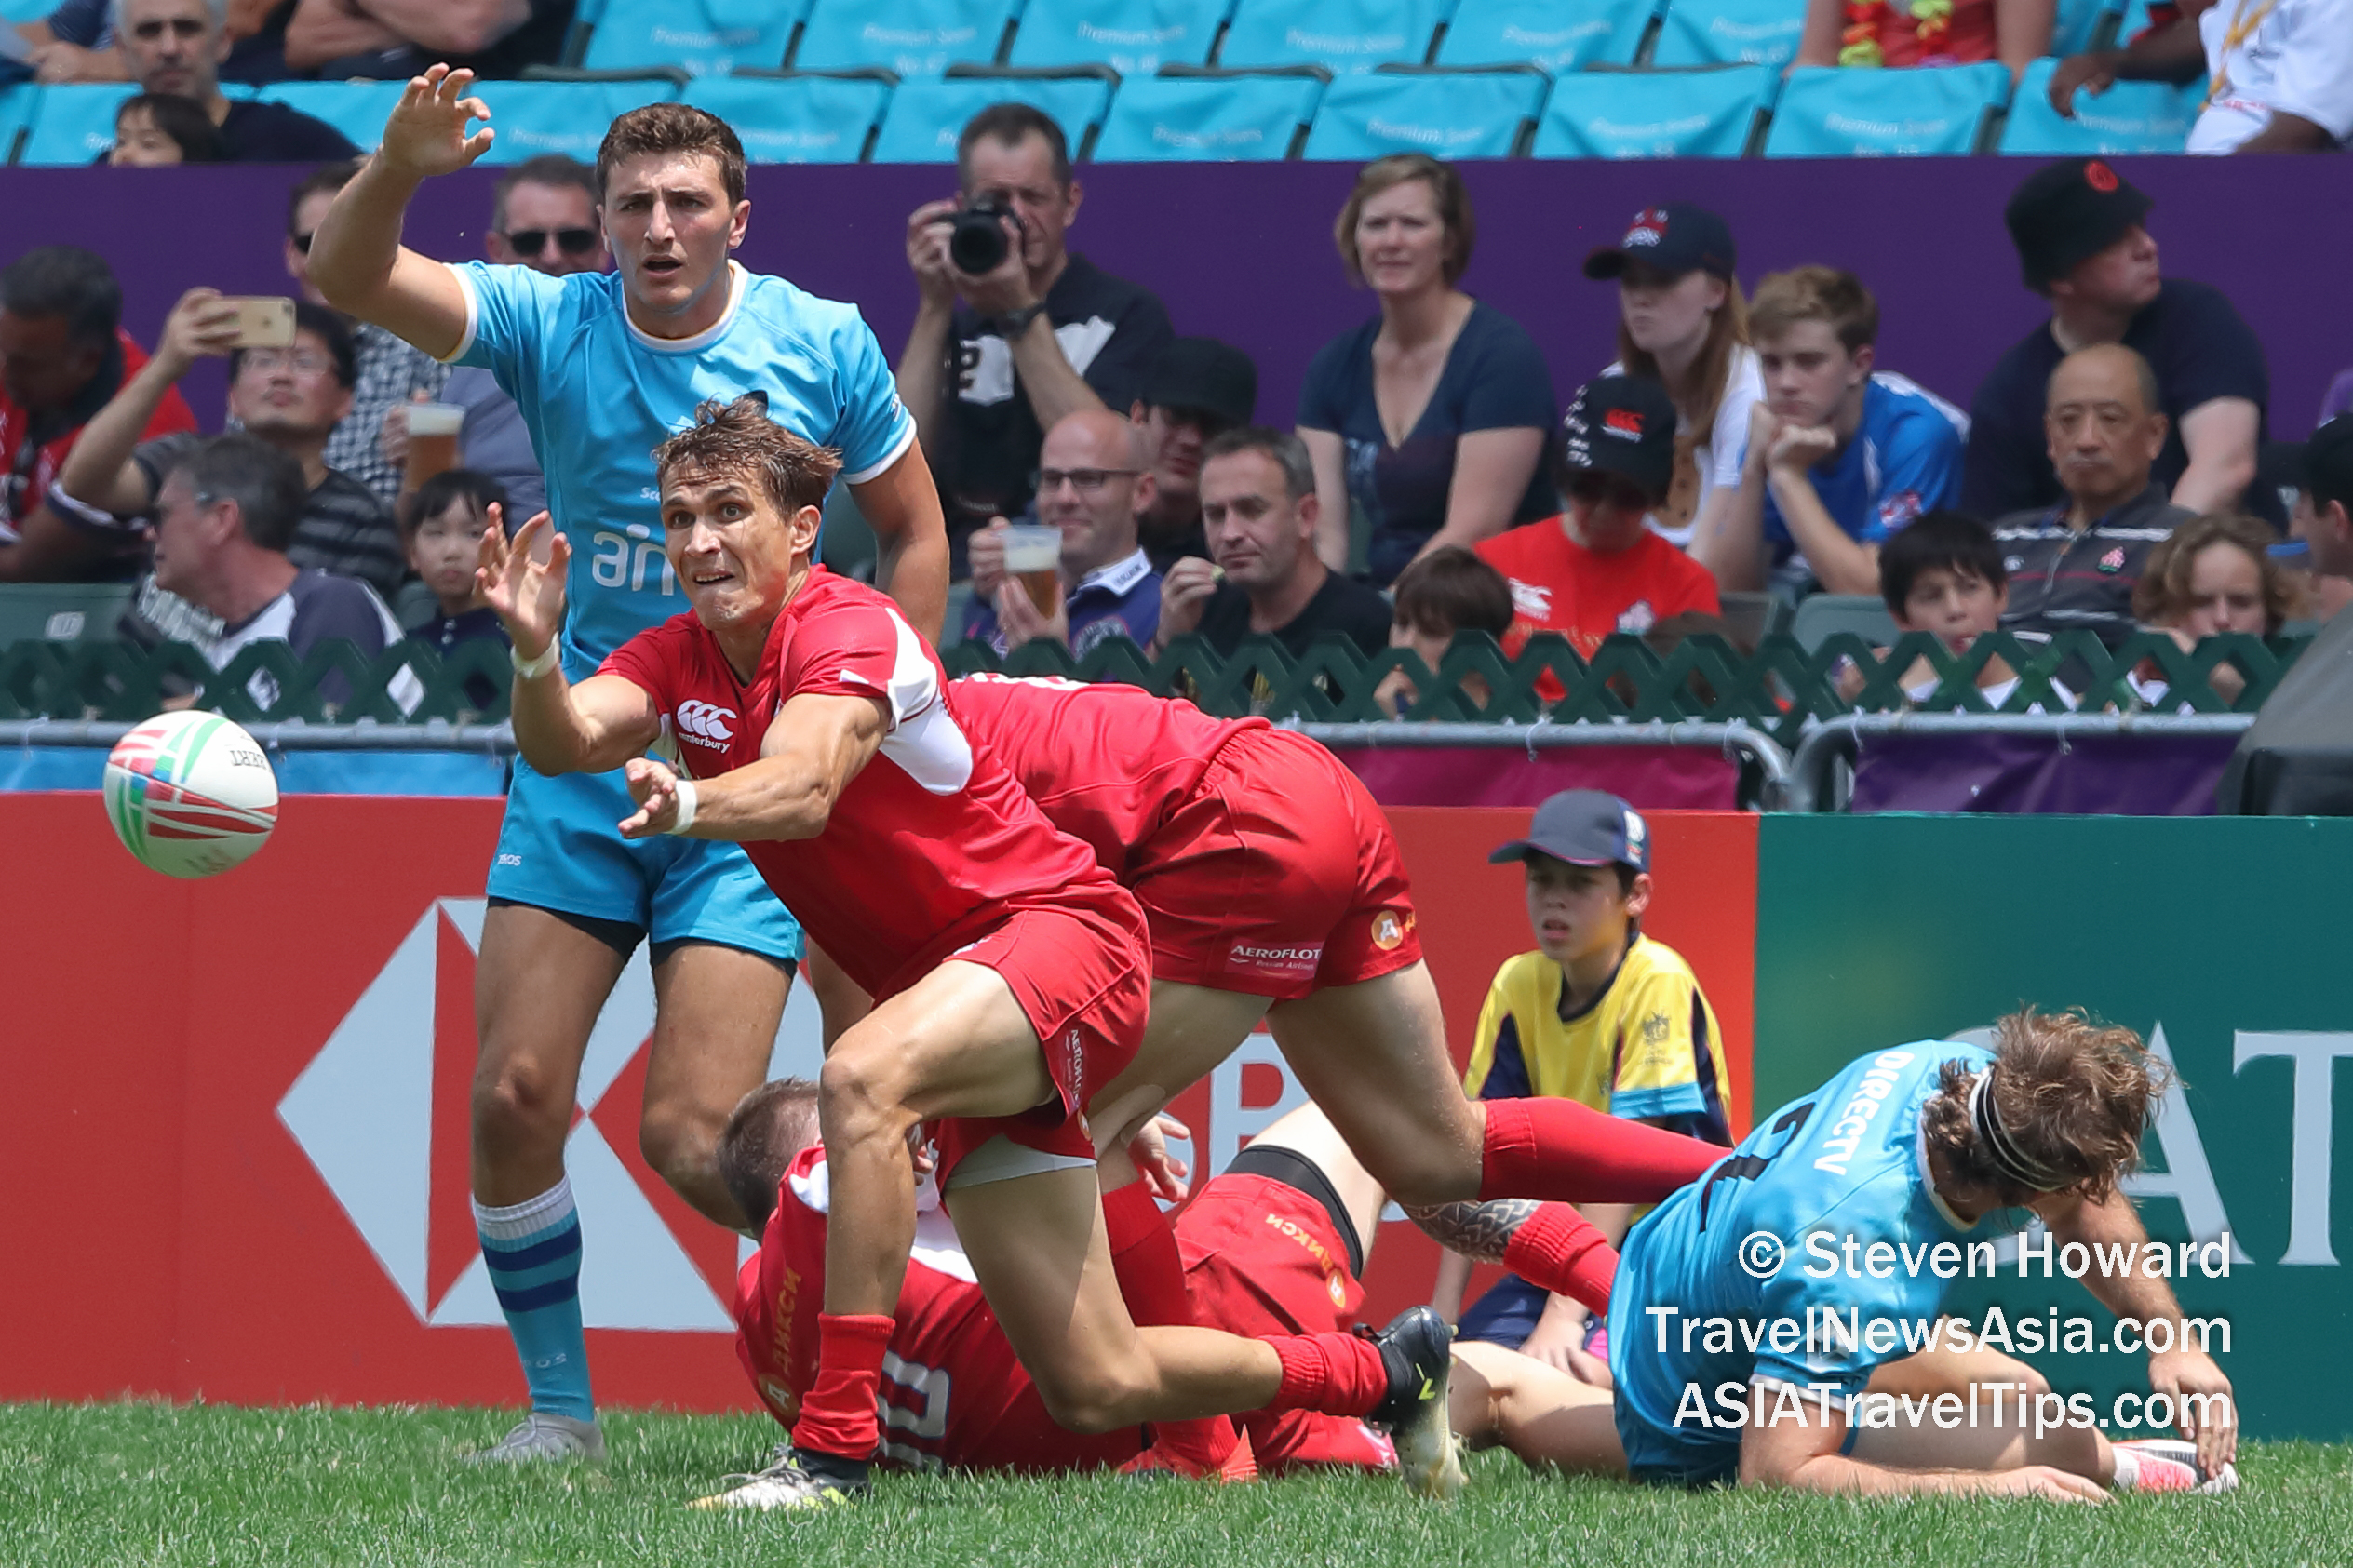 Action from the Cathay Pacific / HSBC Hong Kong Sevens 2019. Picture by Steven Howard of TravelNewsAsia.com Click to enlarge.